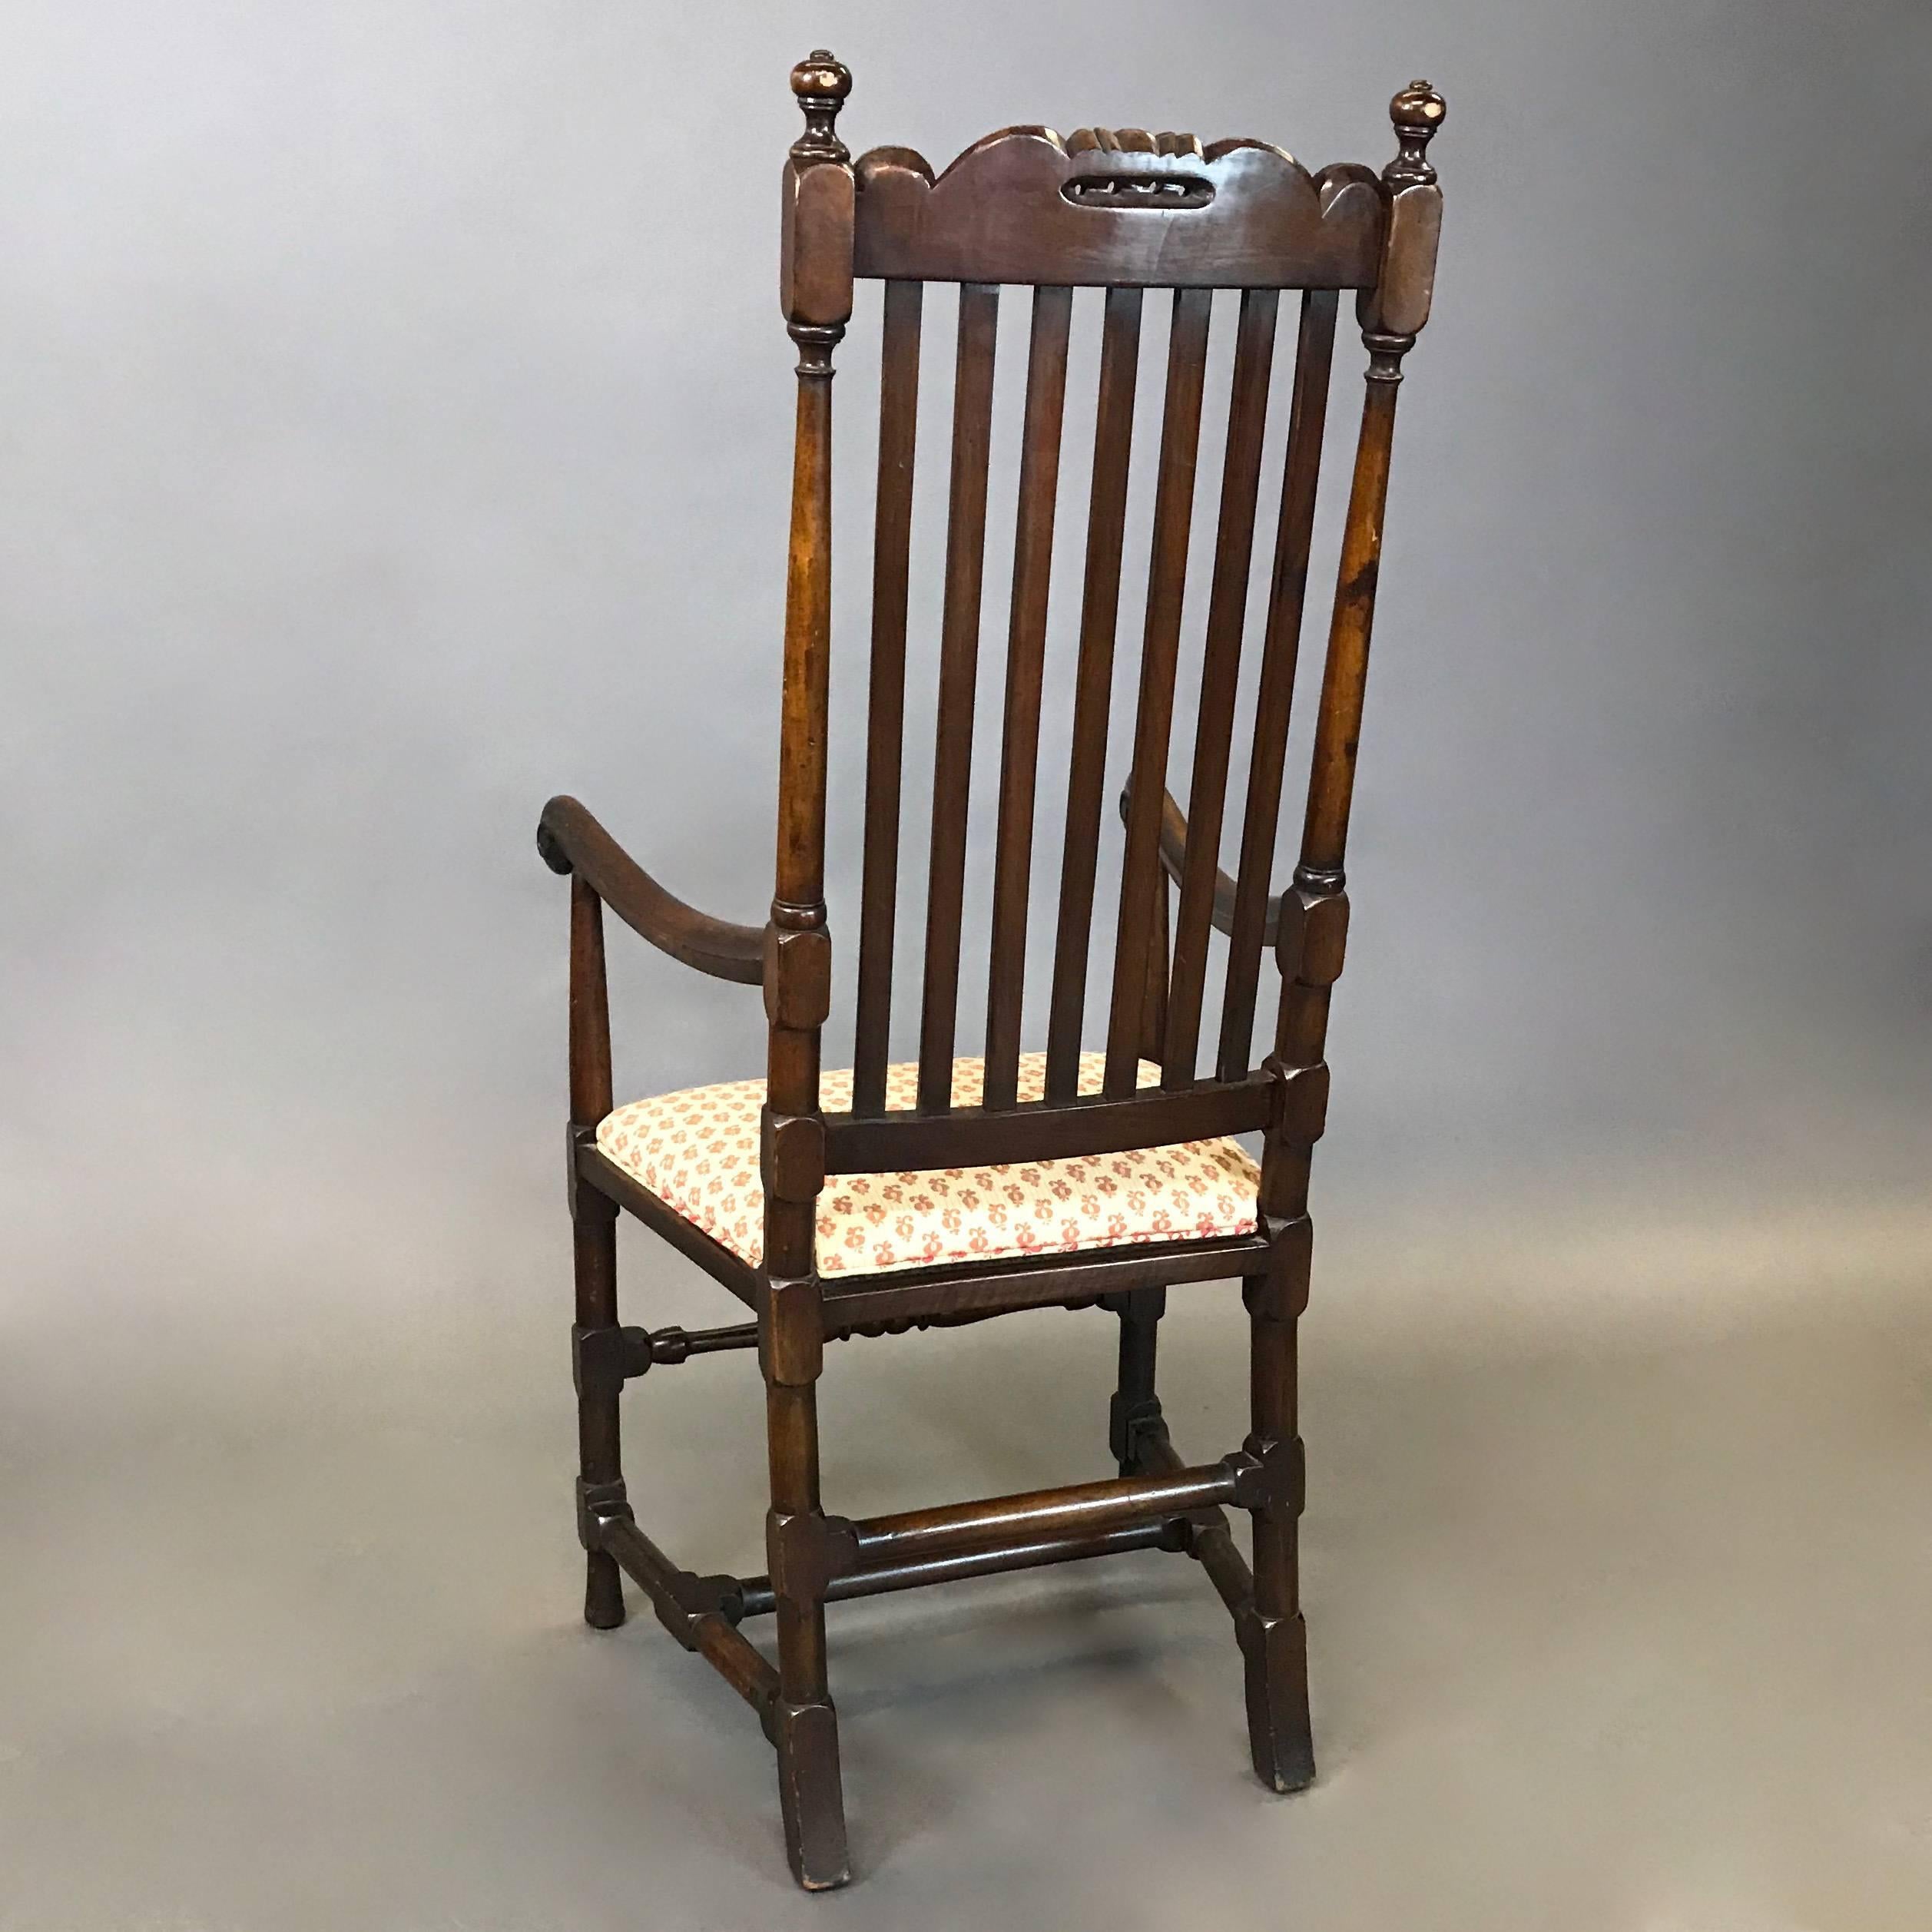 American, late 19th century, William and Mary style, mahogany captain's armchair features a high, slat back with carved crest, baluster and block turned legs, scroll hand-grips and a newly upholstered seat. The seat depth is 14 inches and the arm